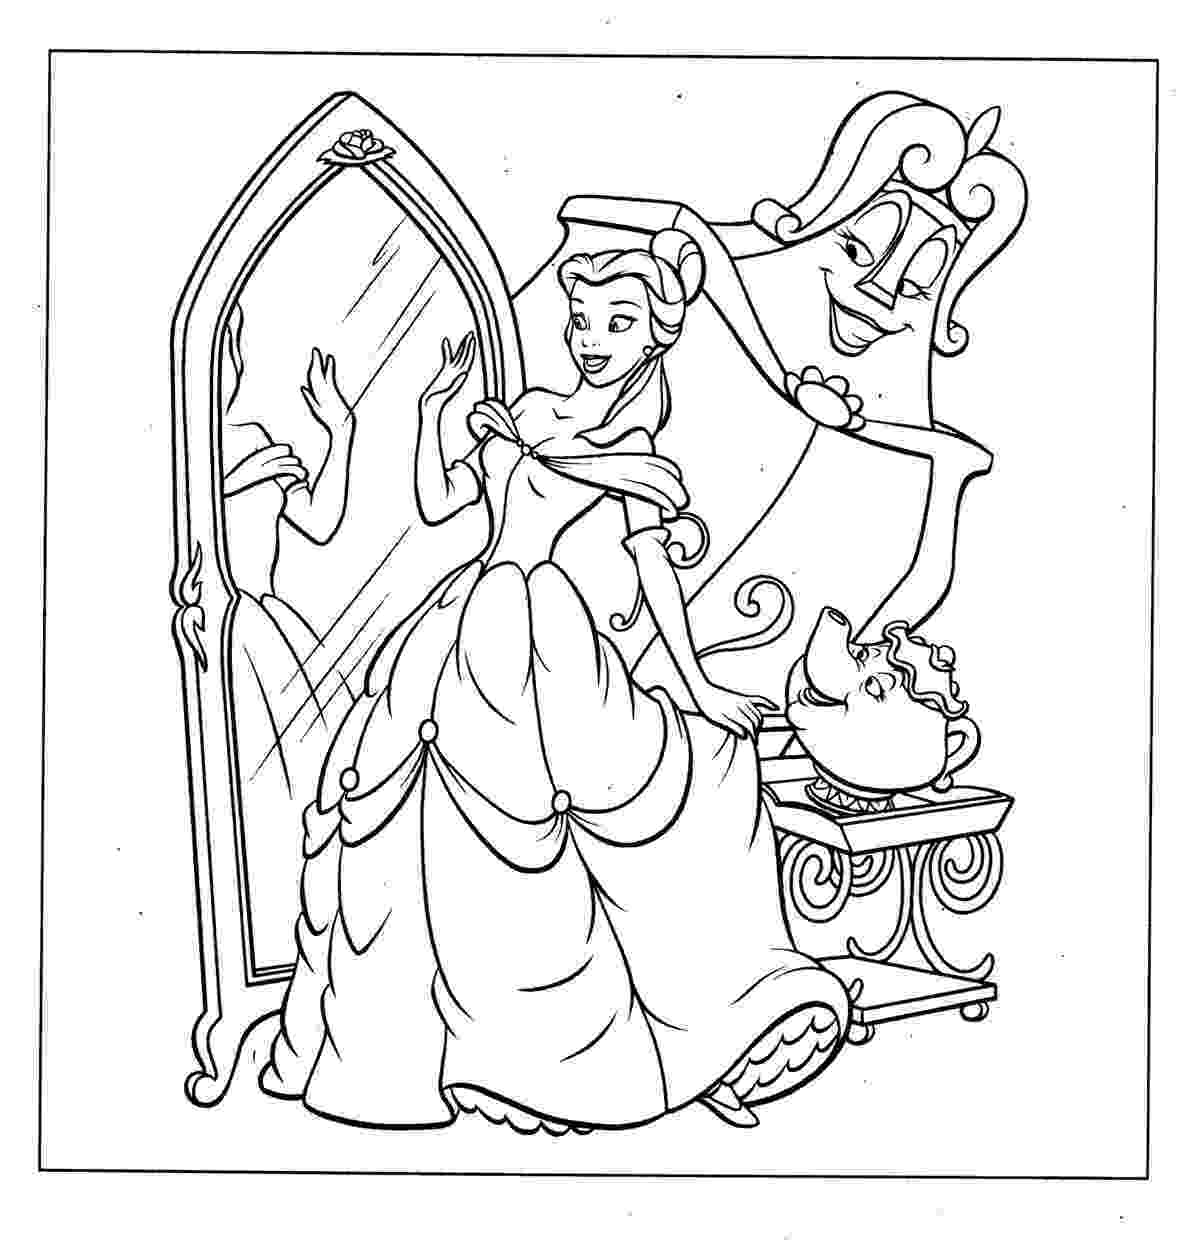 printable coloring pages of princesses transmissionpress disney princess coloring pages printable coloring of princesses pages 